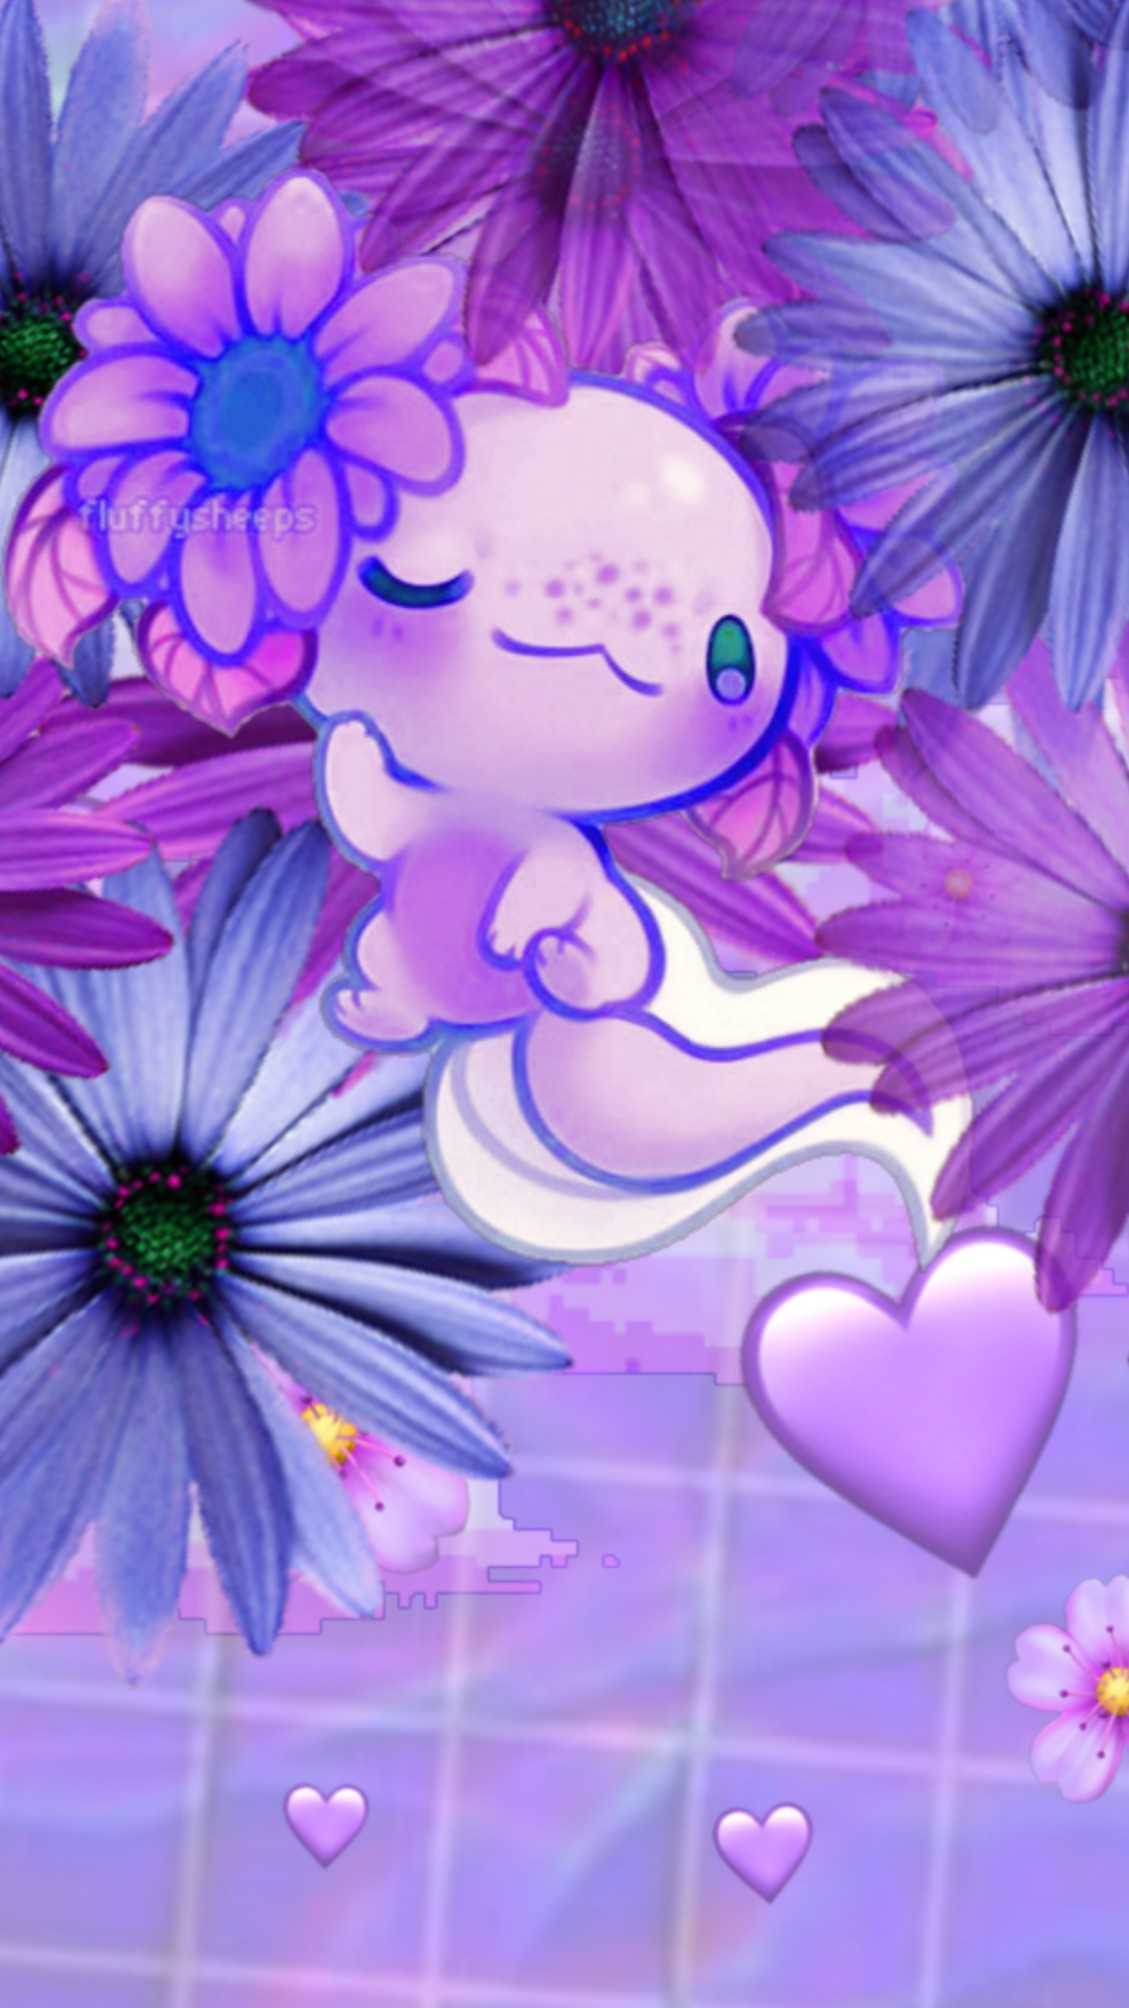 Wallpaper for phone with a picture of a purple axew - Axolotl